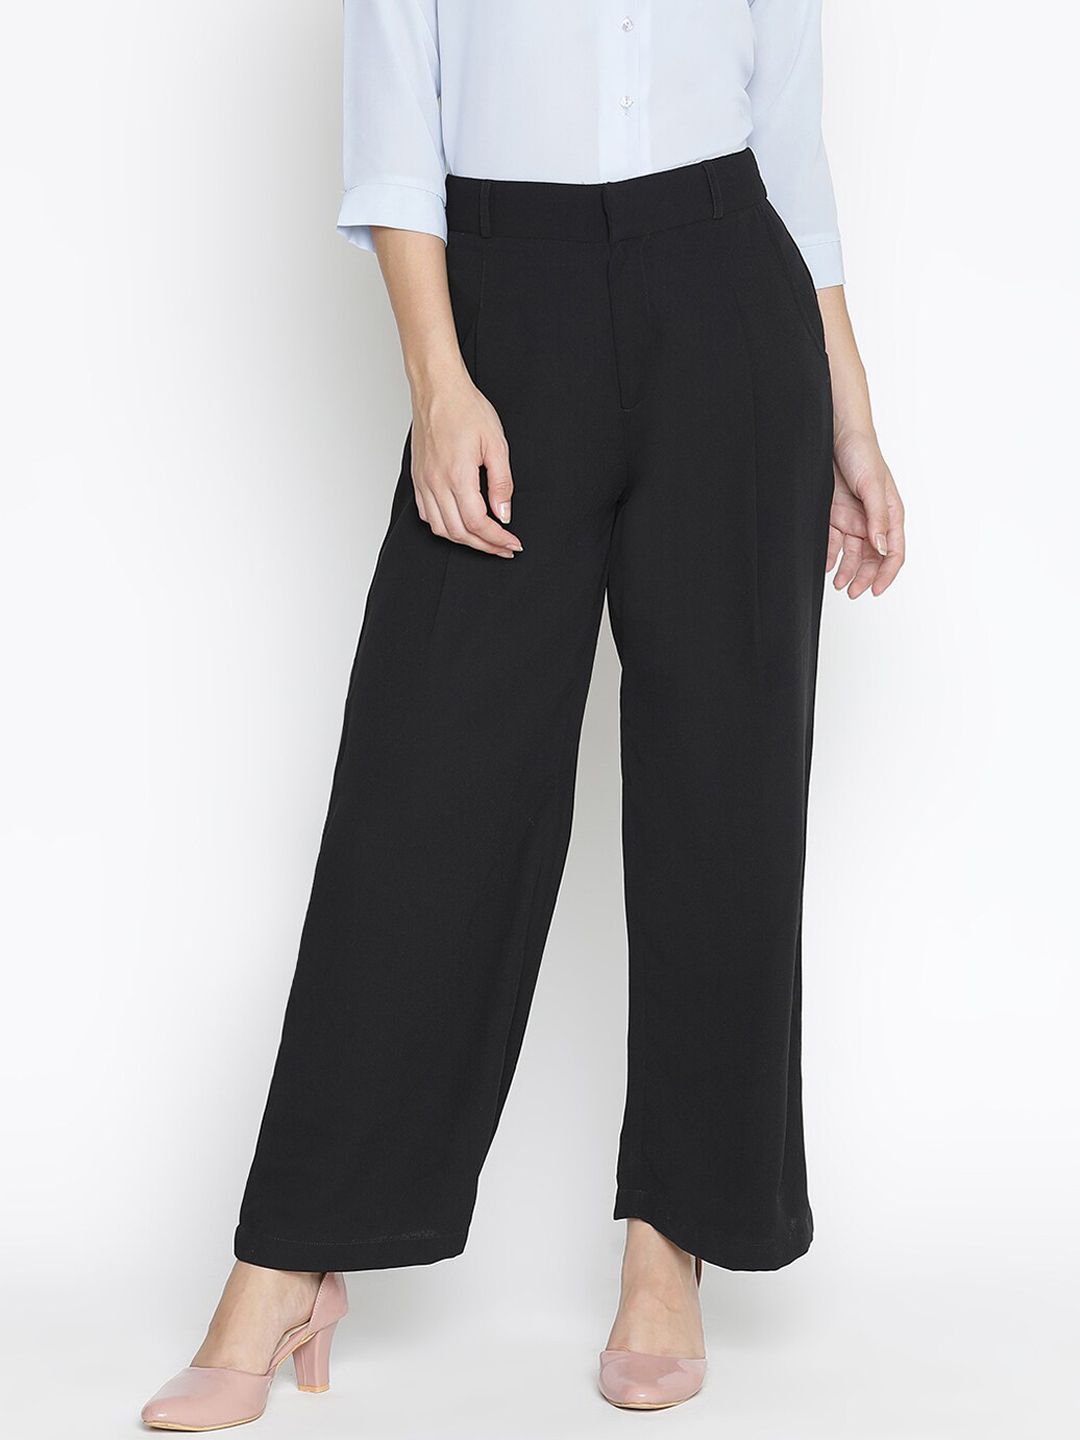 DRAAX Fashions Women Black Mid-Rise Formal Trousers Price in India